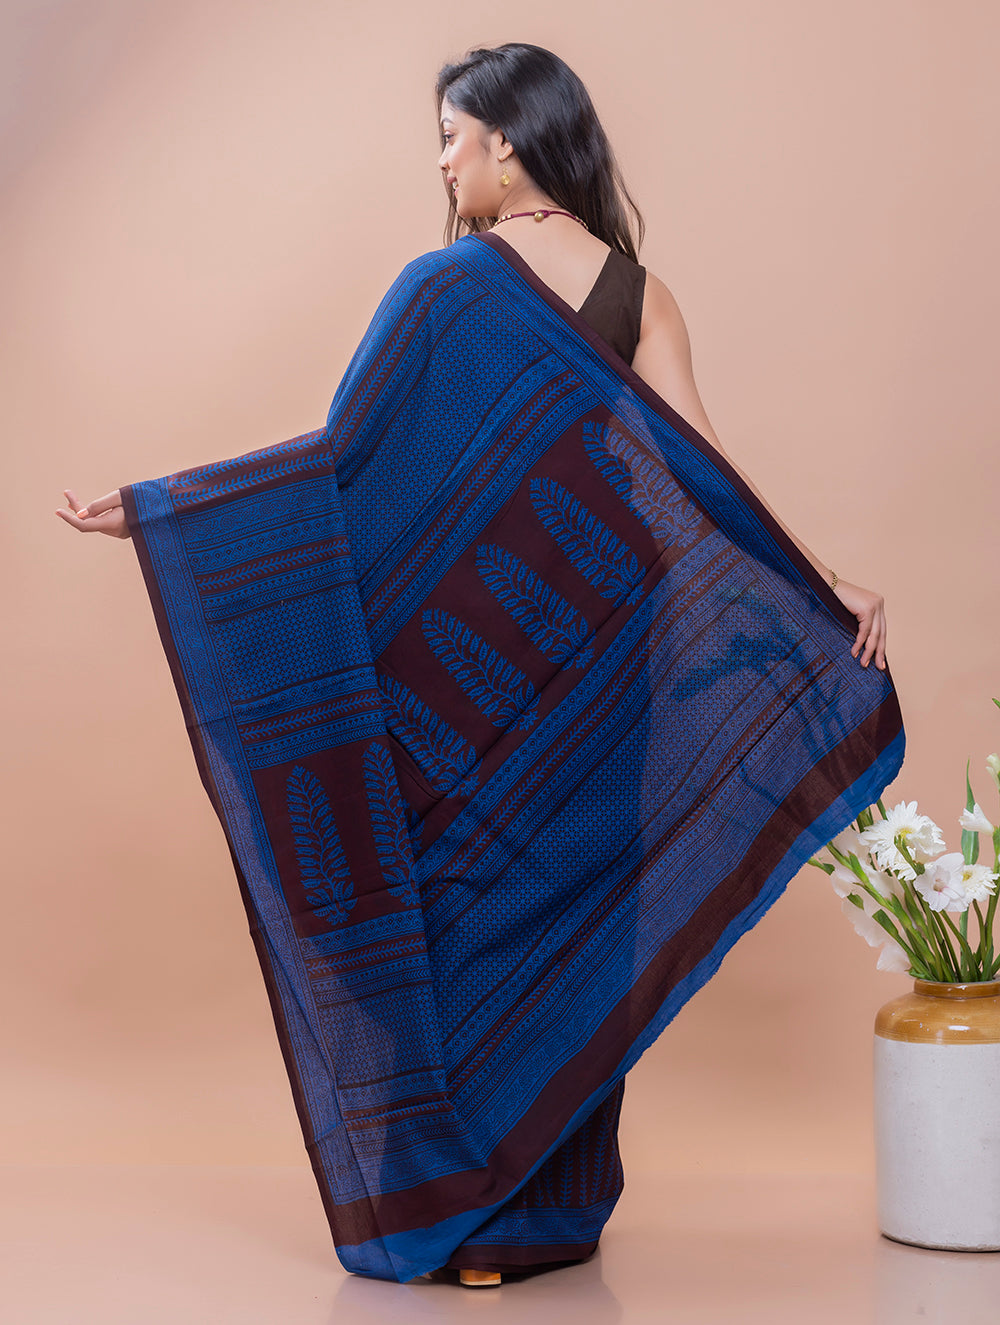 Load image into Gallery viewer, Bagh Hand Block Printed Cotton Saree - Black &amp; Blue Vine